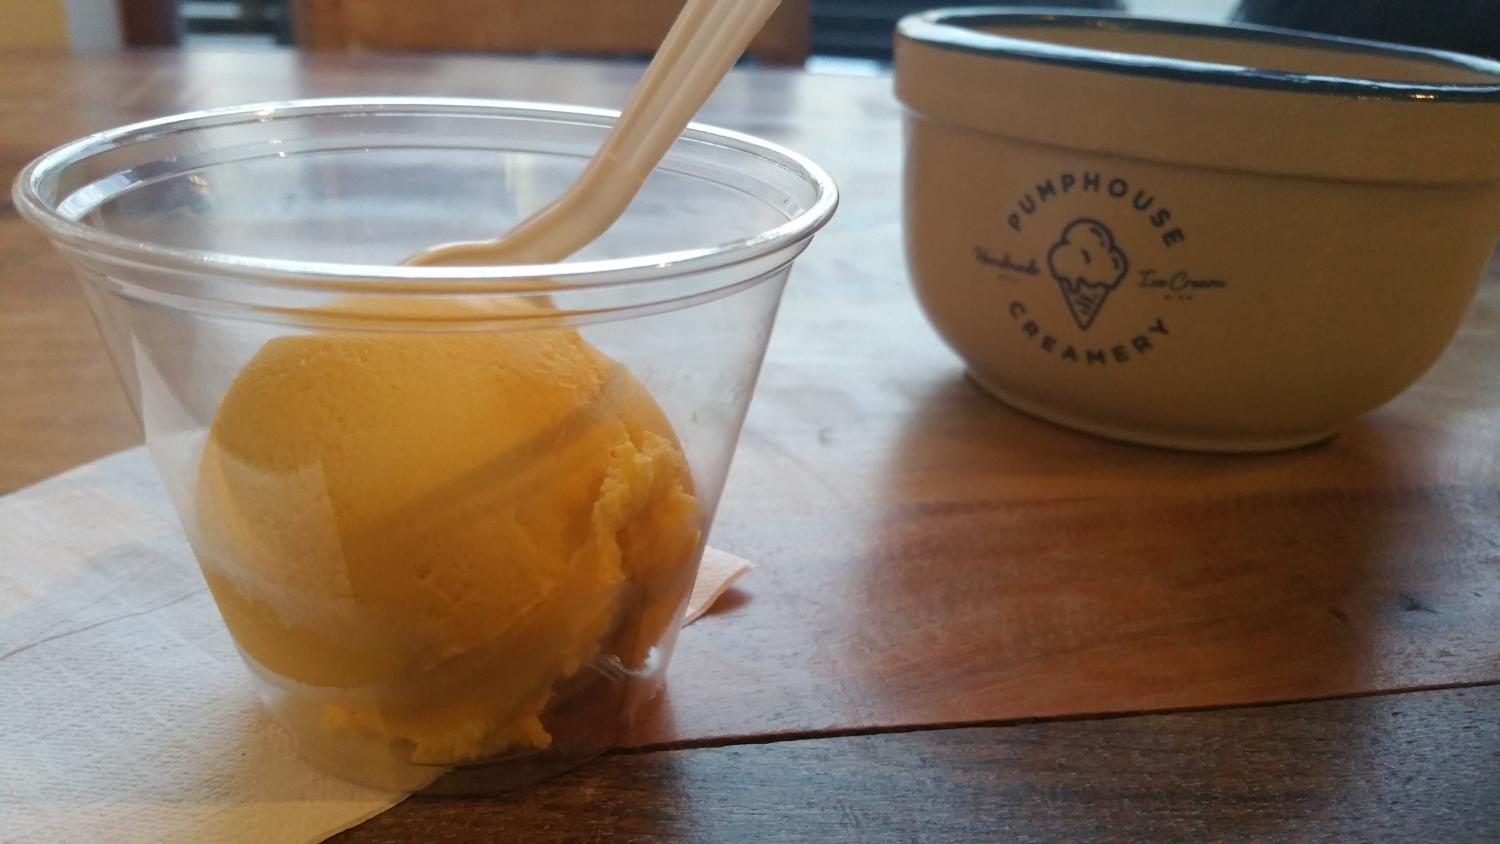 Pumphouse Creamery is known for farm to to frozen handmade ice cream.